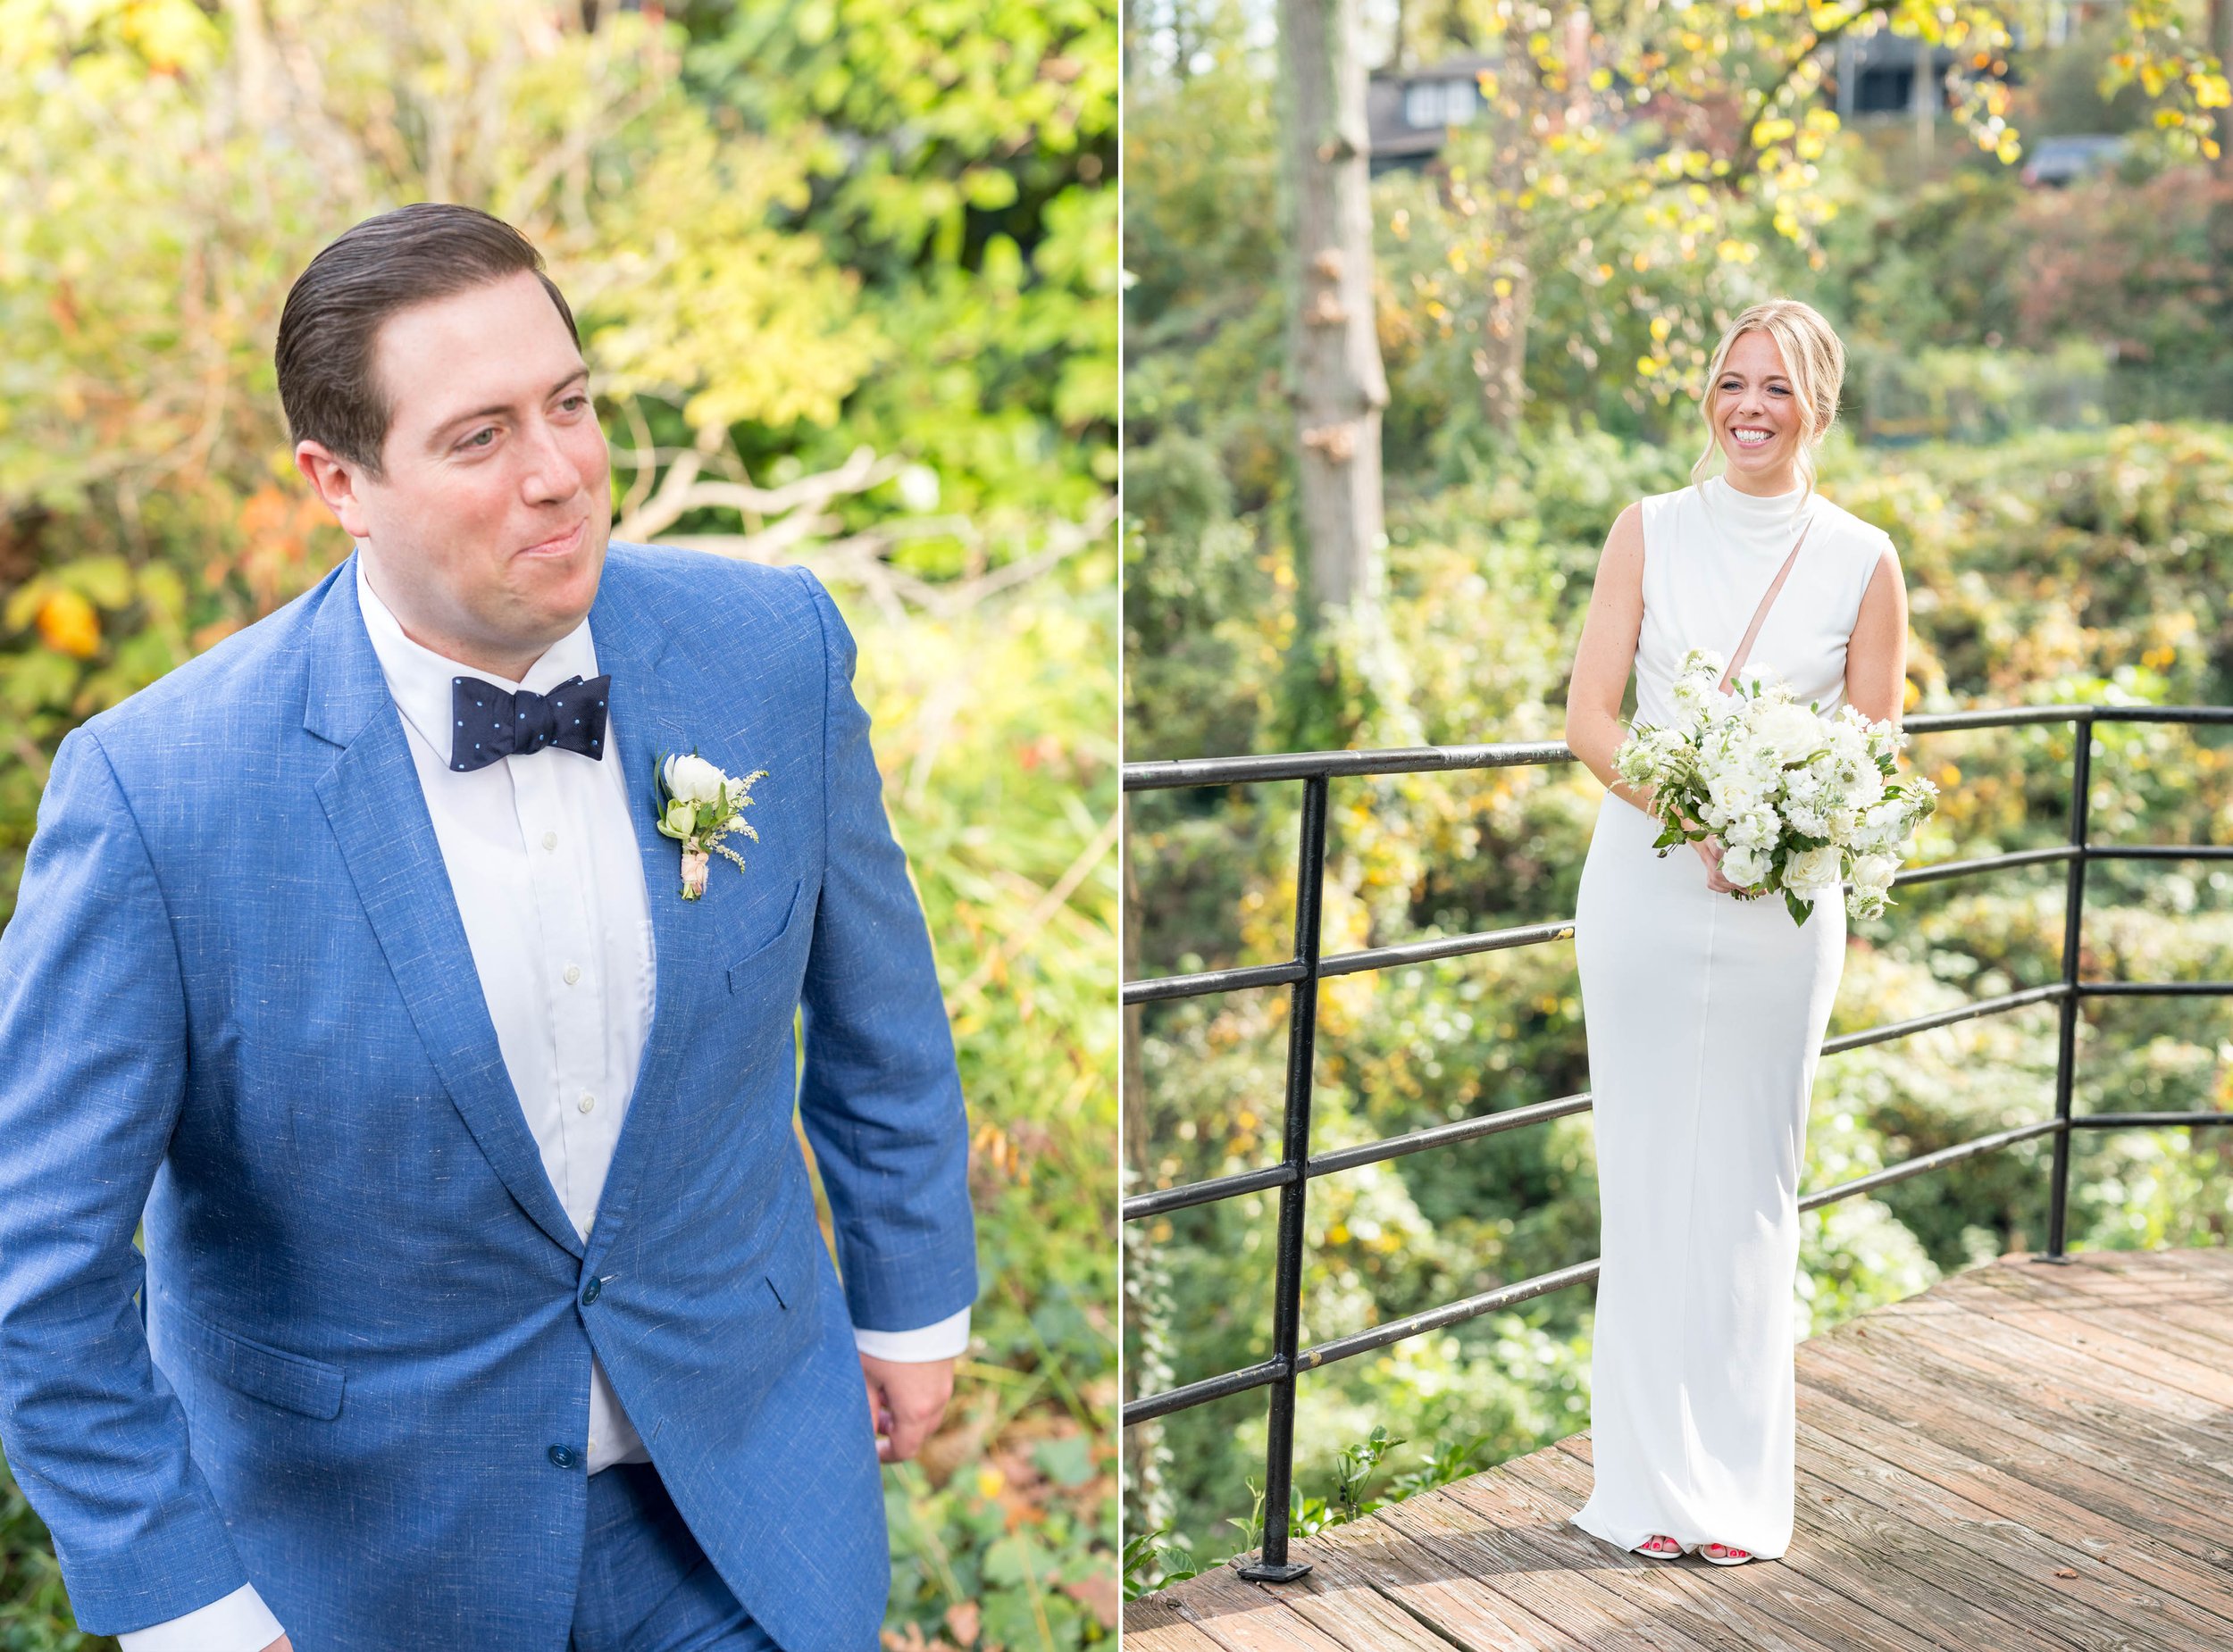 Groom walks up stairs to see bride in white Tom Ford wedding gown